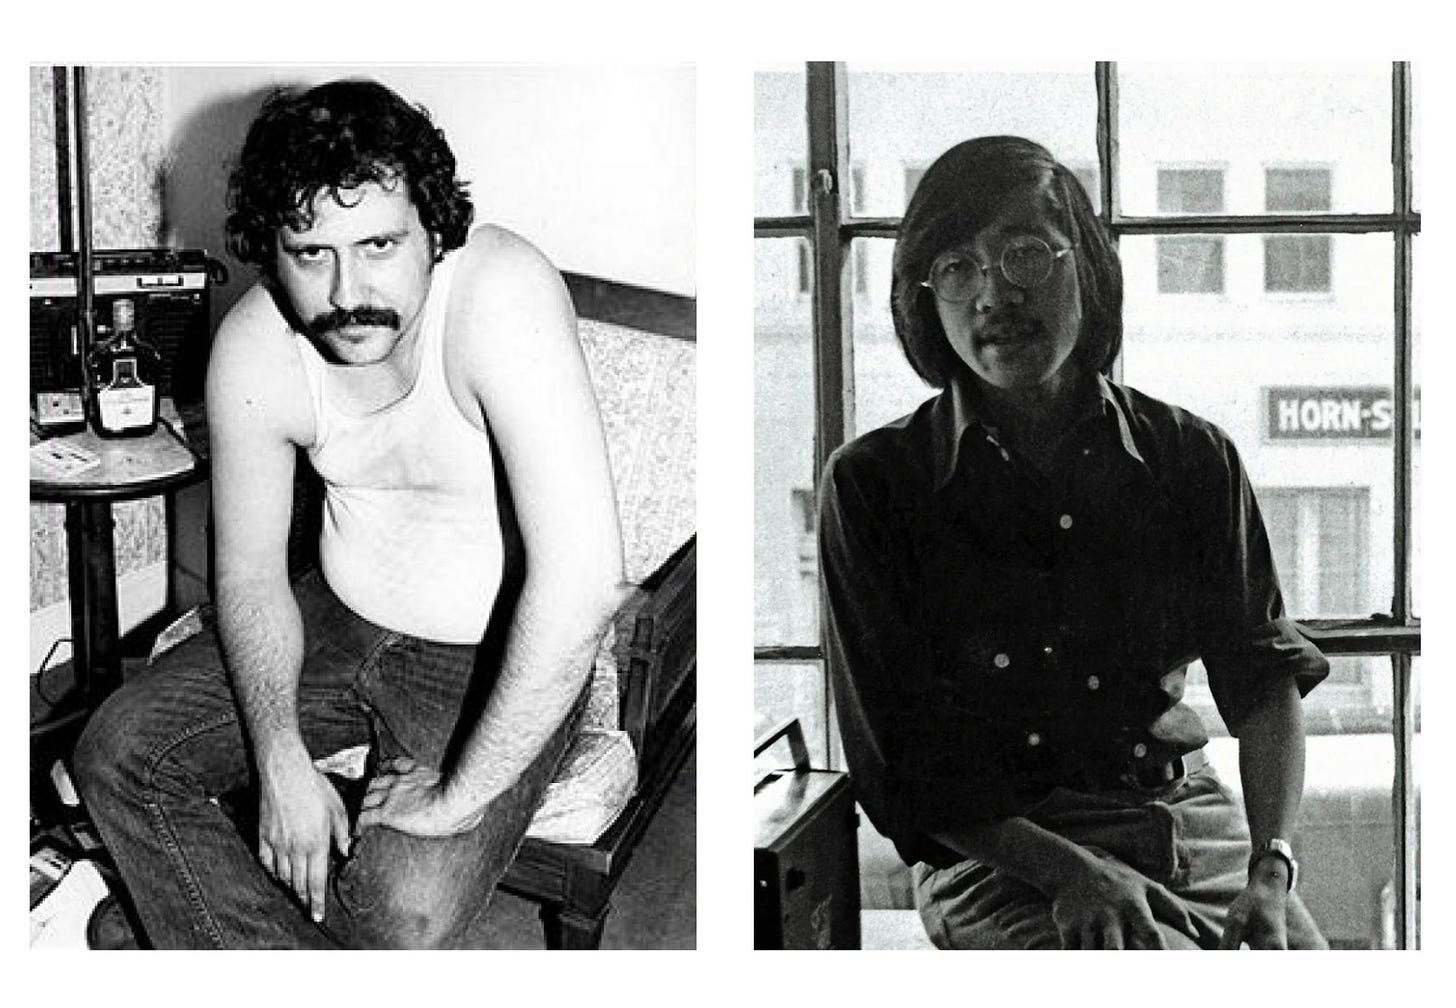 Side by side images of Lester Bangs and Rolling Stone journalist Ben Fong-Torres.